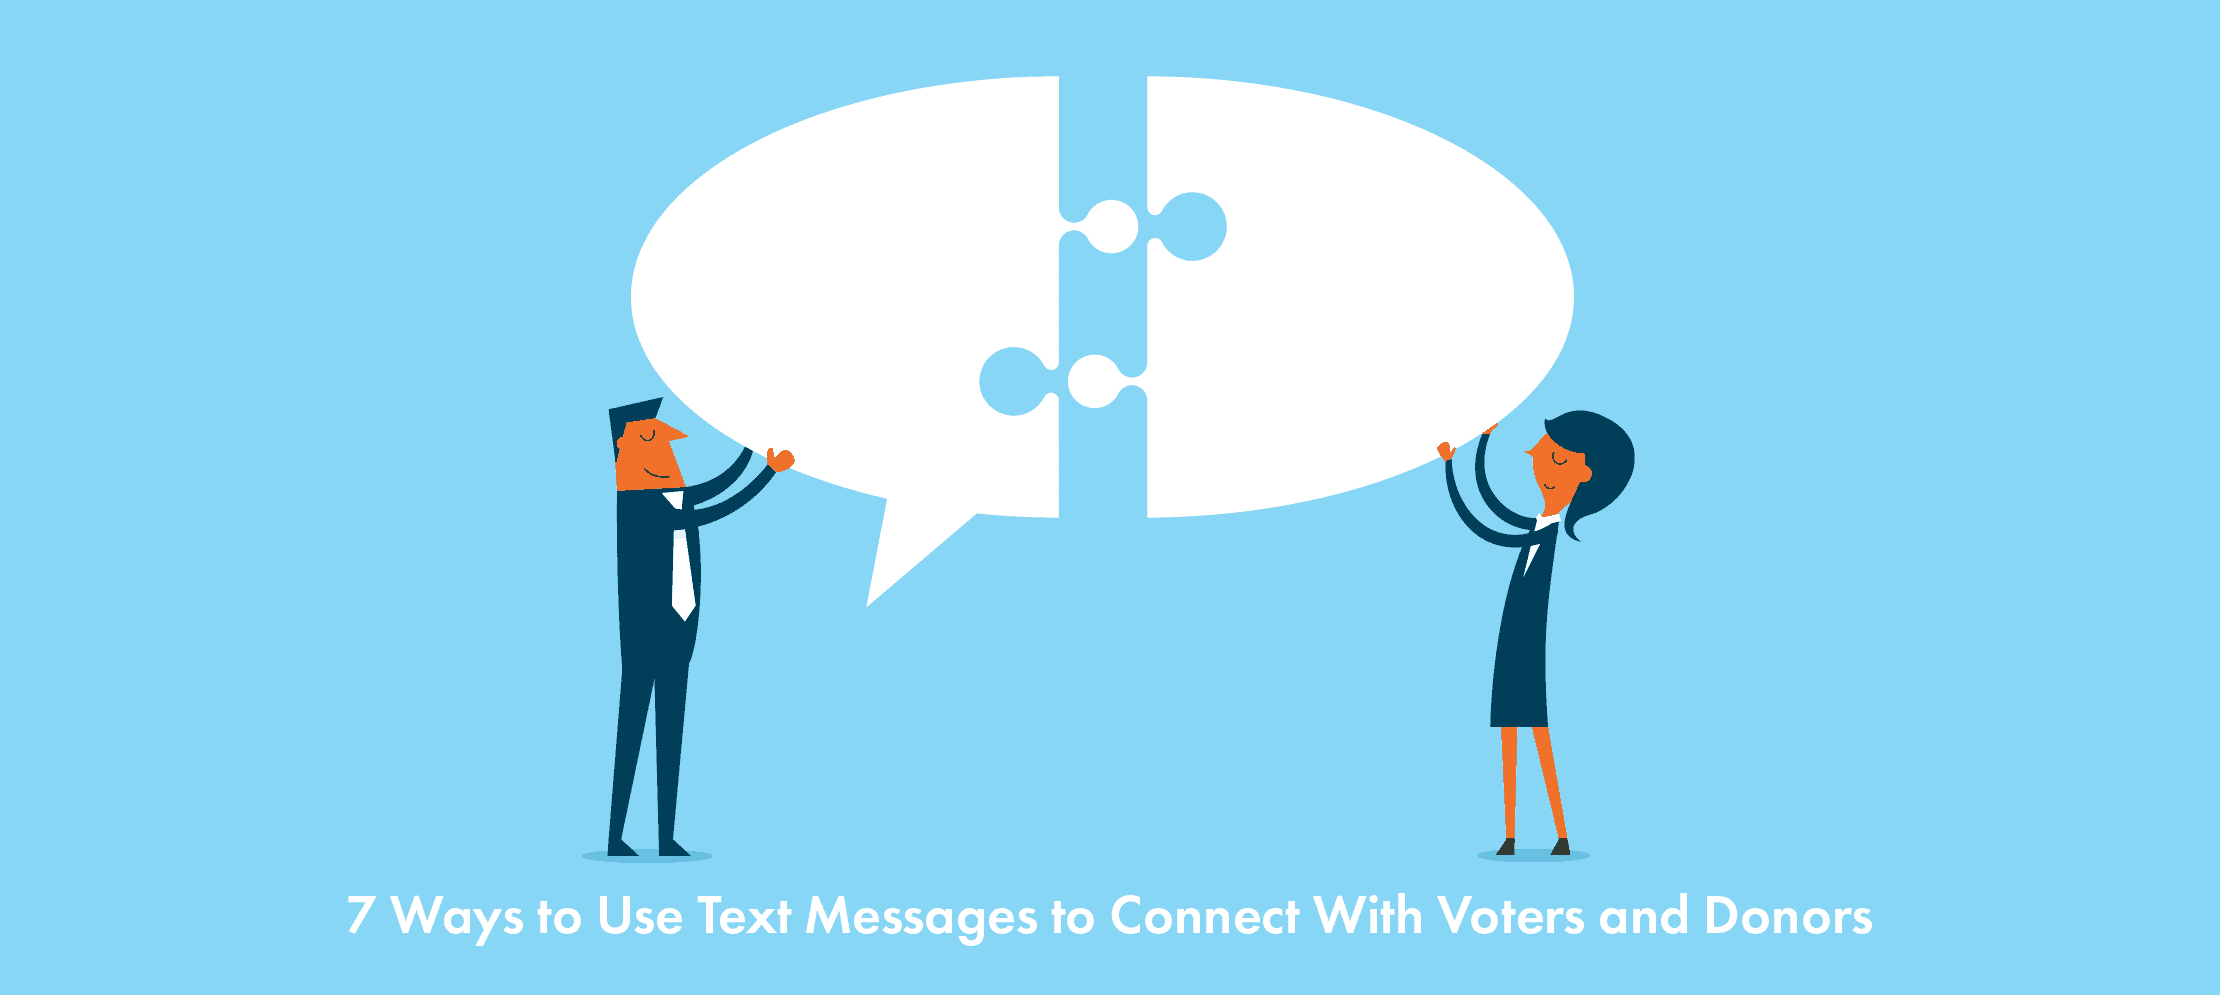 7 Ways to Use Text Messages to Connect With Voters and Donors (1)